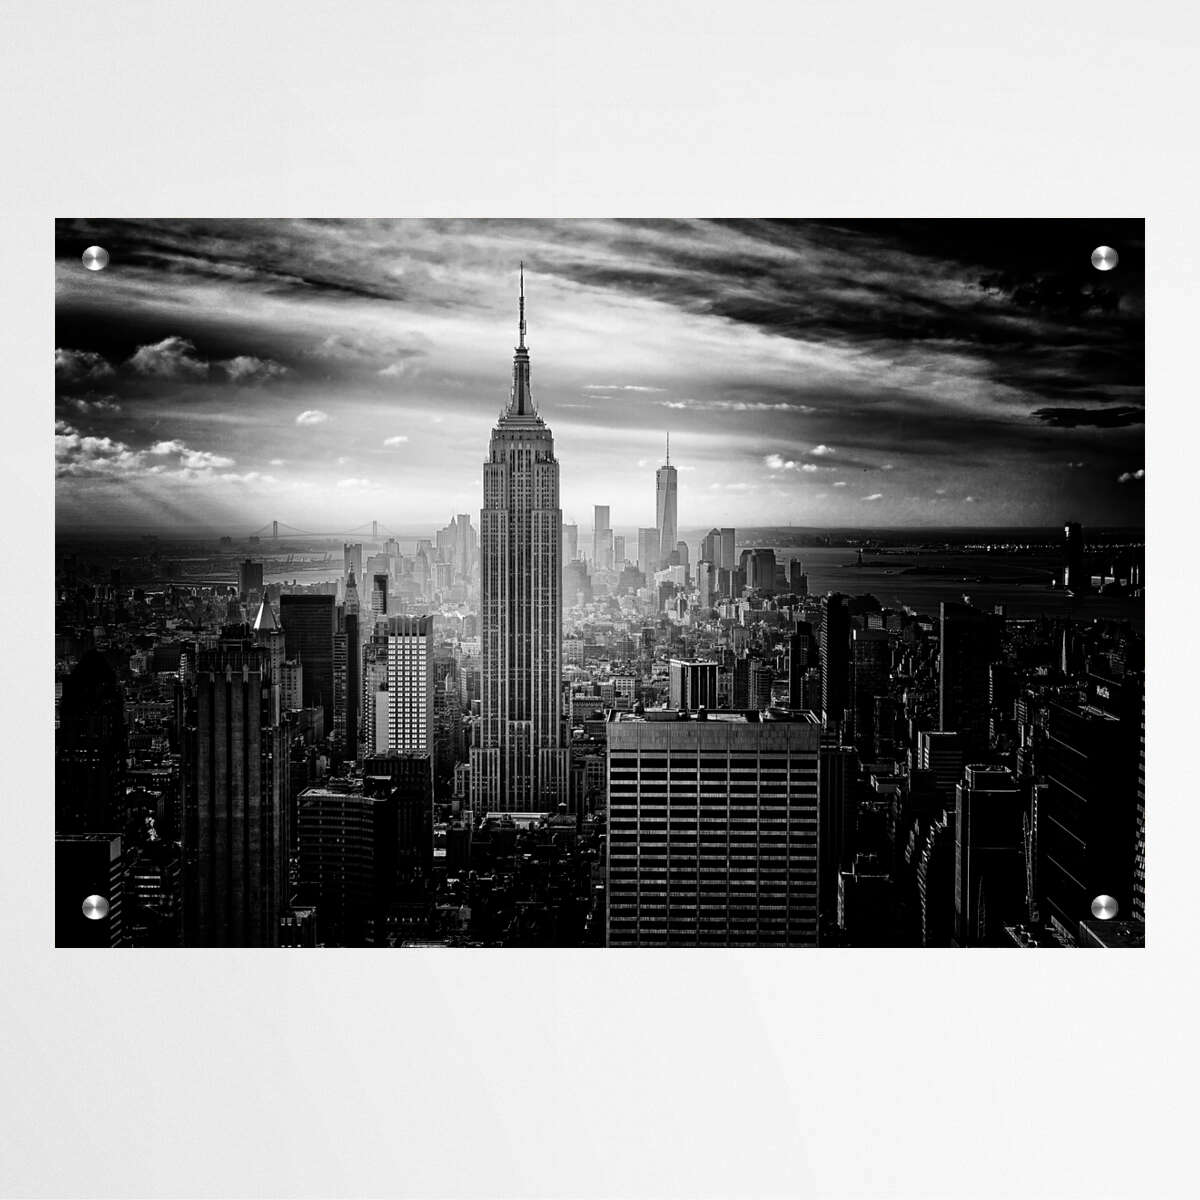 Empire State Building and Downtown New York City Skyline | Destinations Wall Art Prints - The Canvas Hive